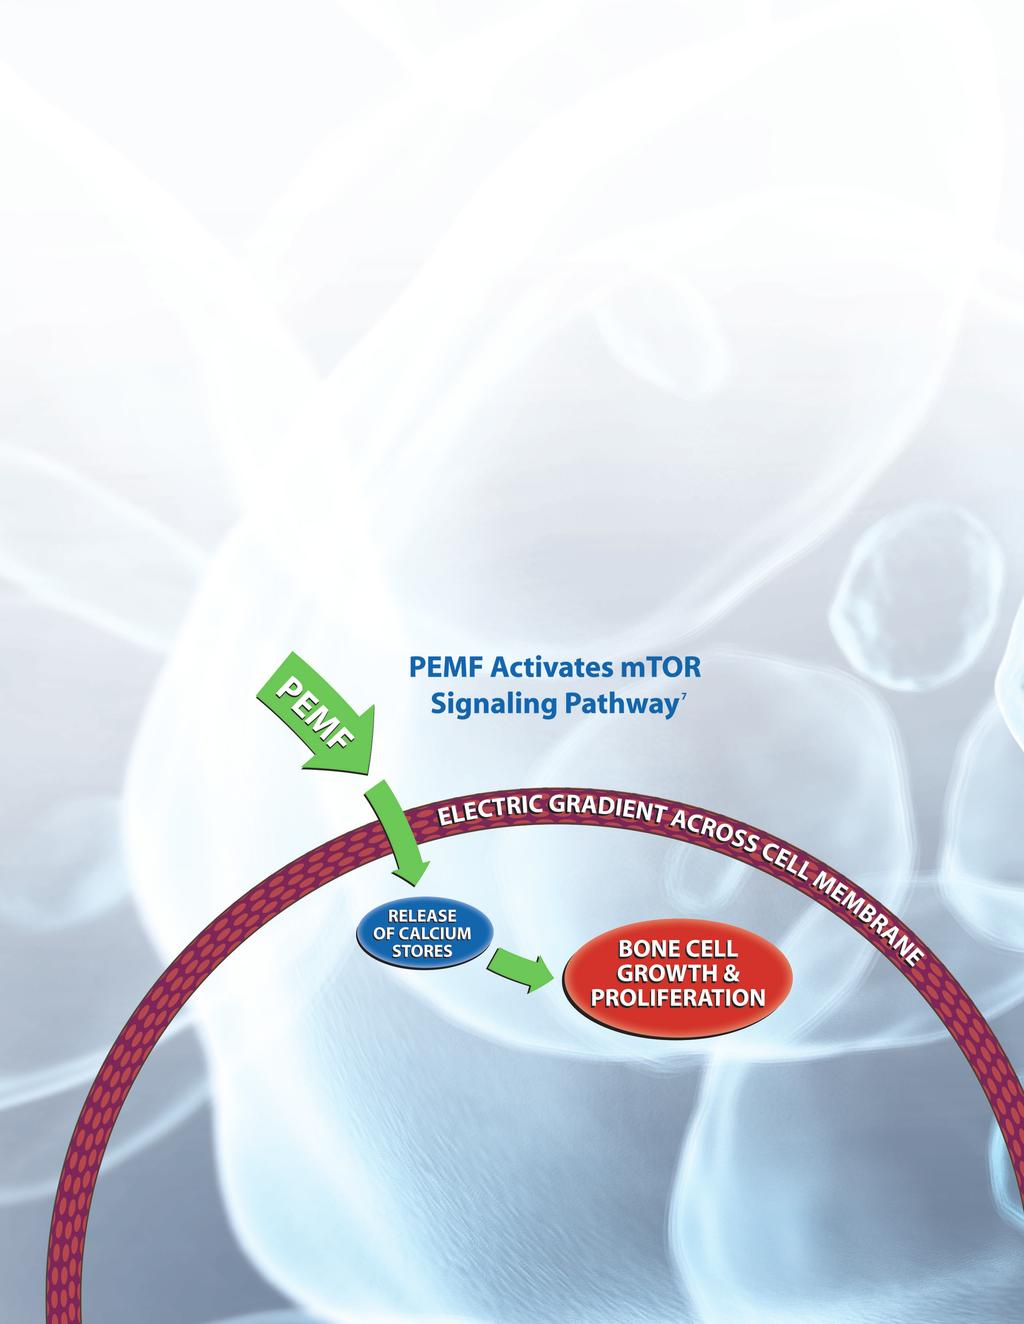 HOW PEMF WORKS: MOLECULAR LEVEL Research on the molecular impact of PEMF demonstrates: 7, 8, 11, 12 Exposure of a bone-forming cell (osteoblast) to PEMF